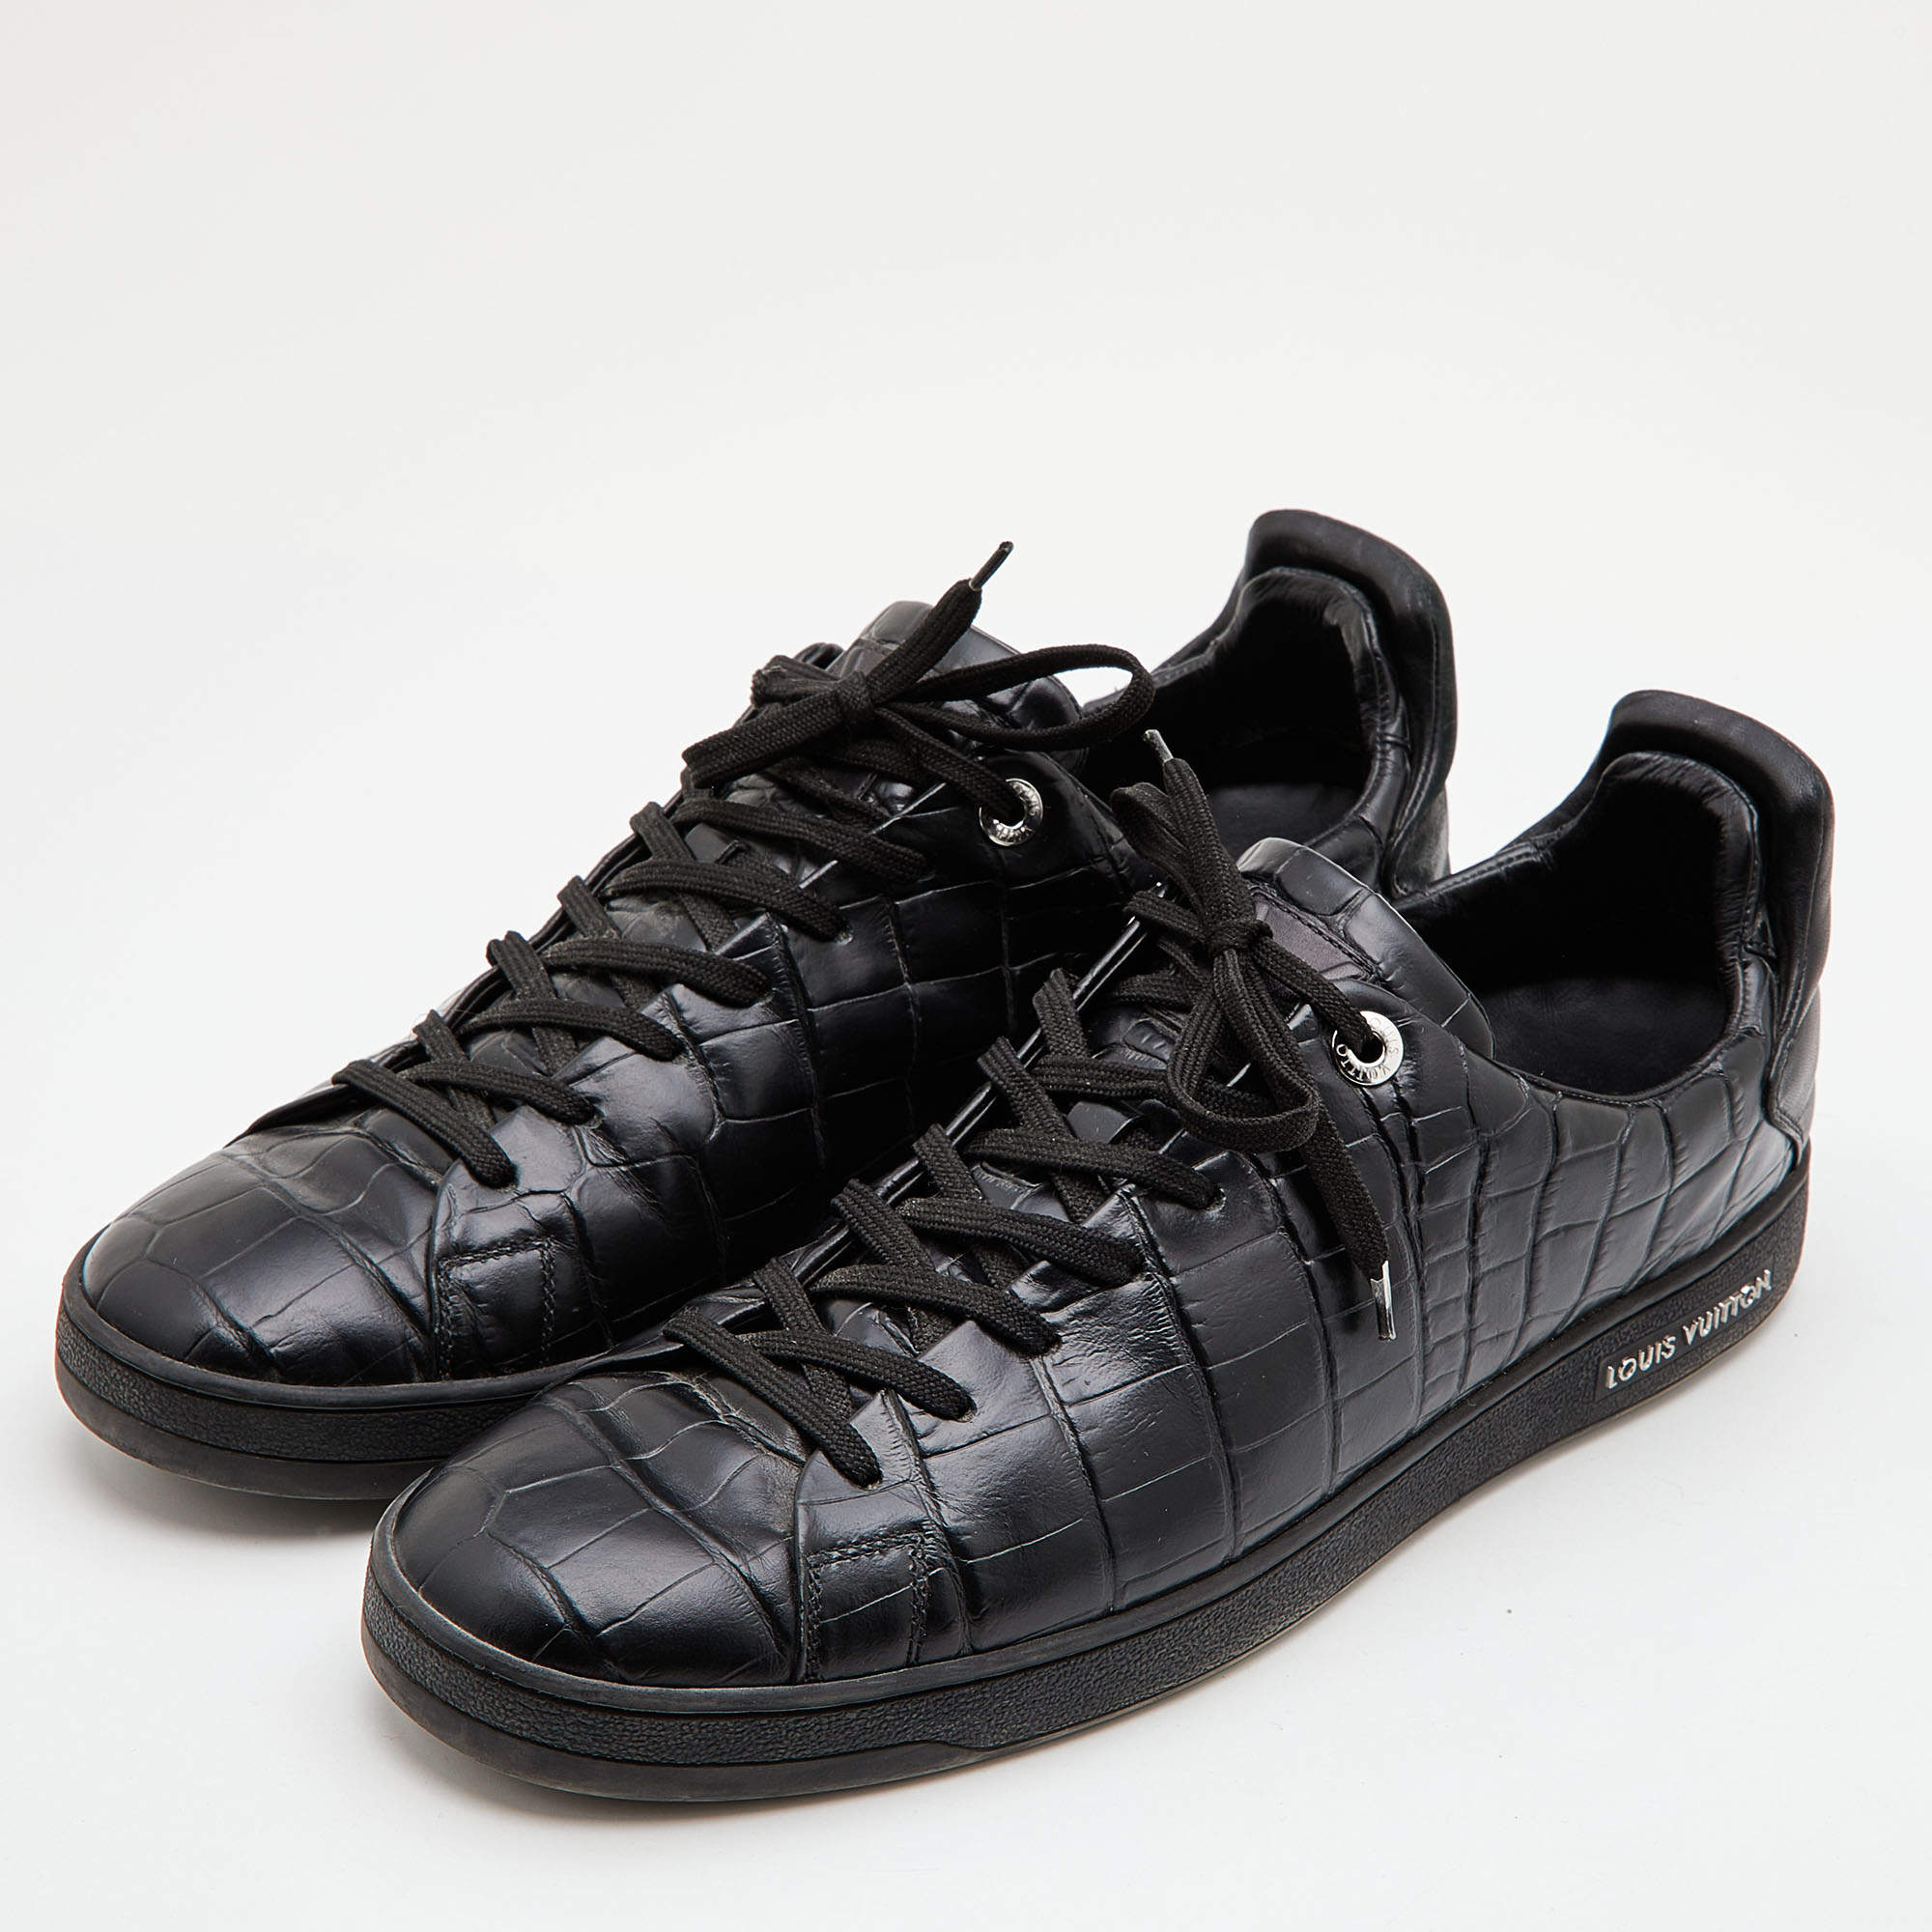 Louis Vuitton Black Croc Embossed Leather Frontrow Sneakers Size 43.5 Louis  Vuitton